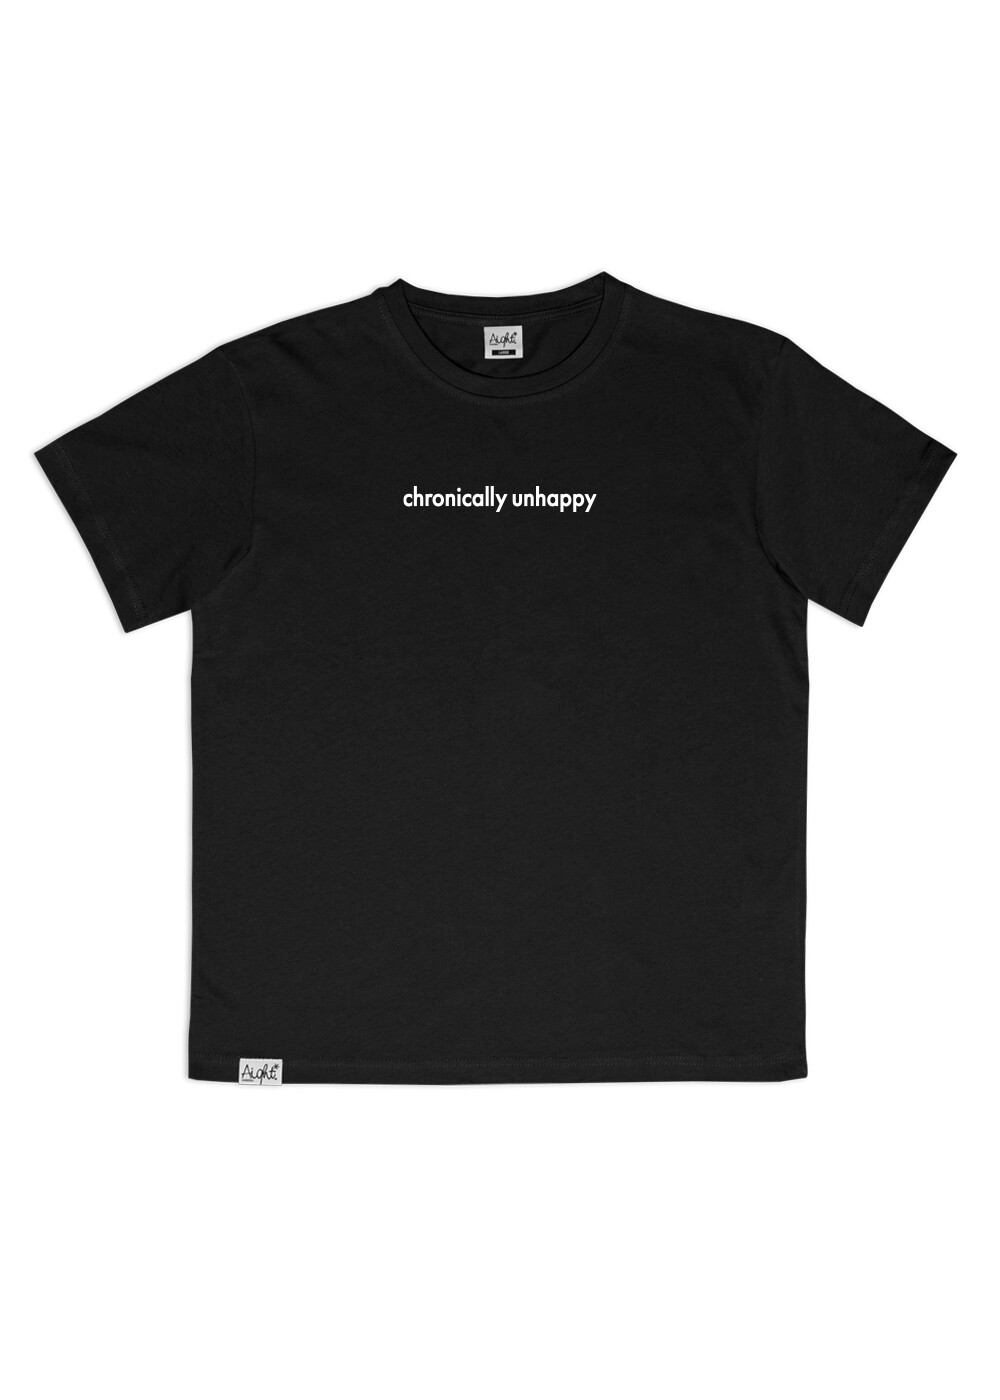 Aight* T-Shirt - "´Chronically Unhappy"...